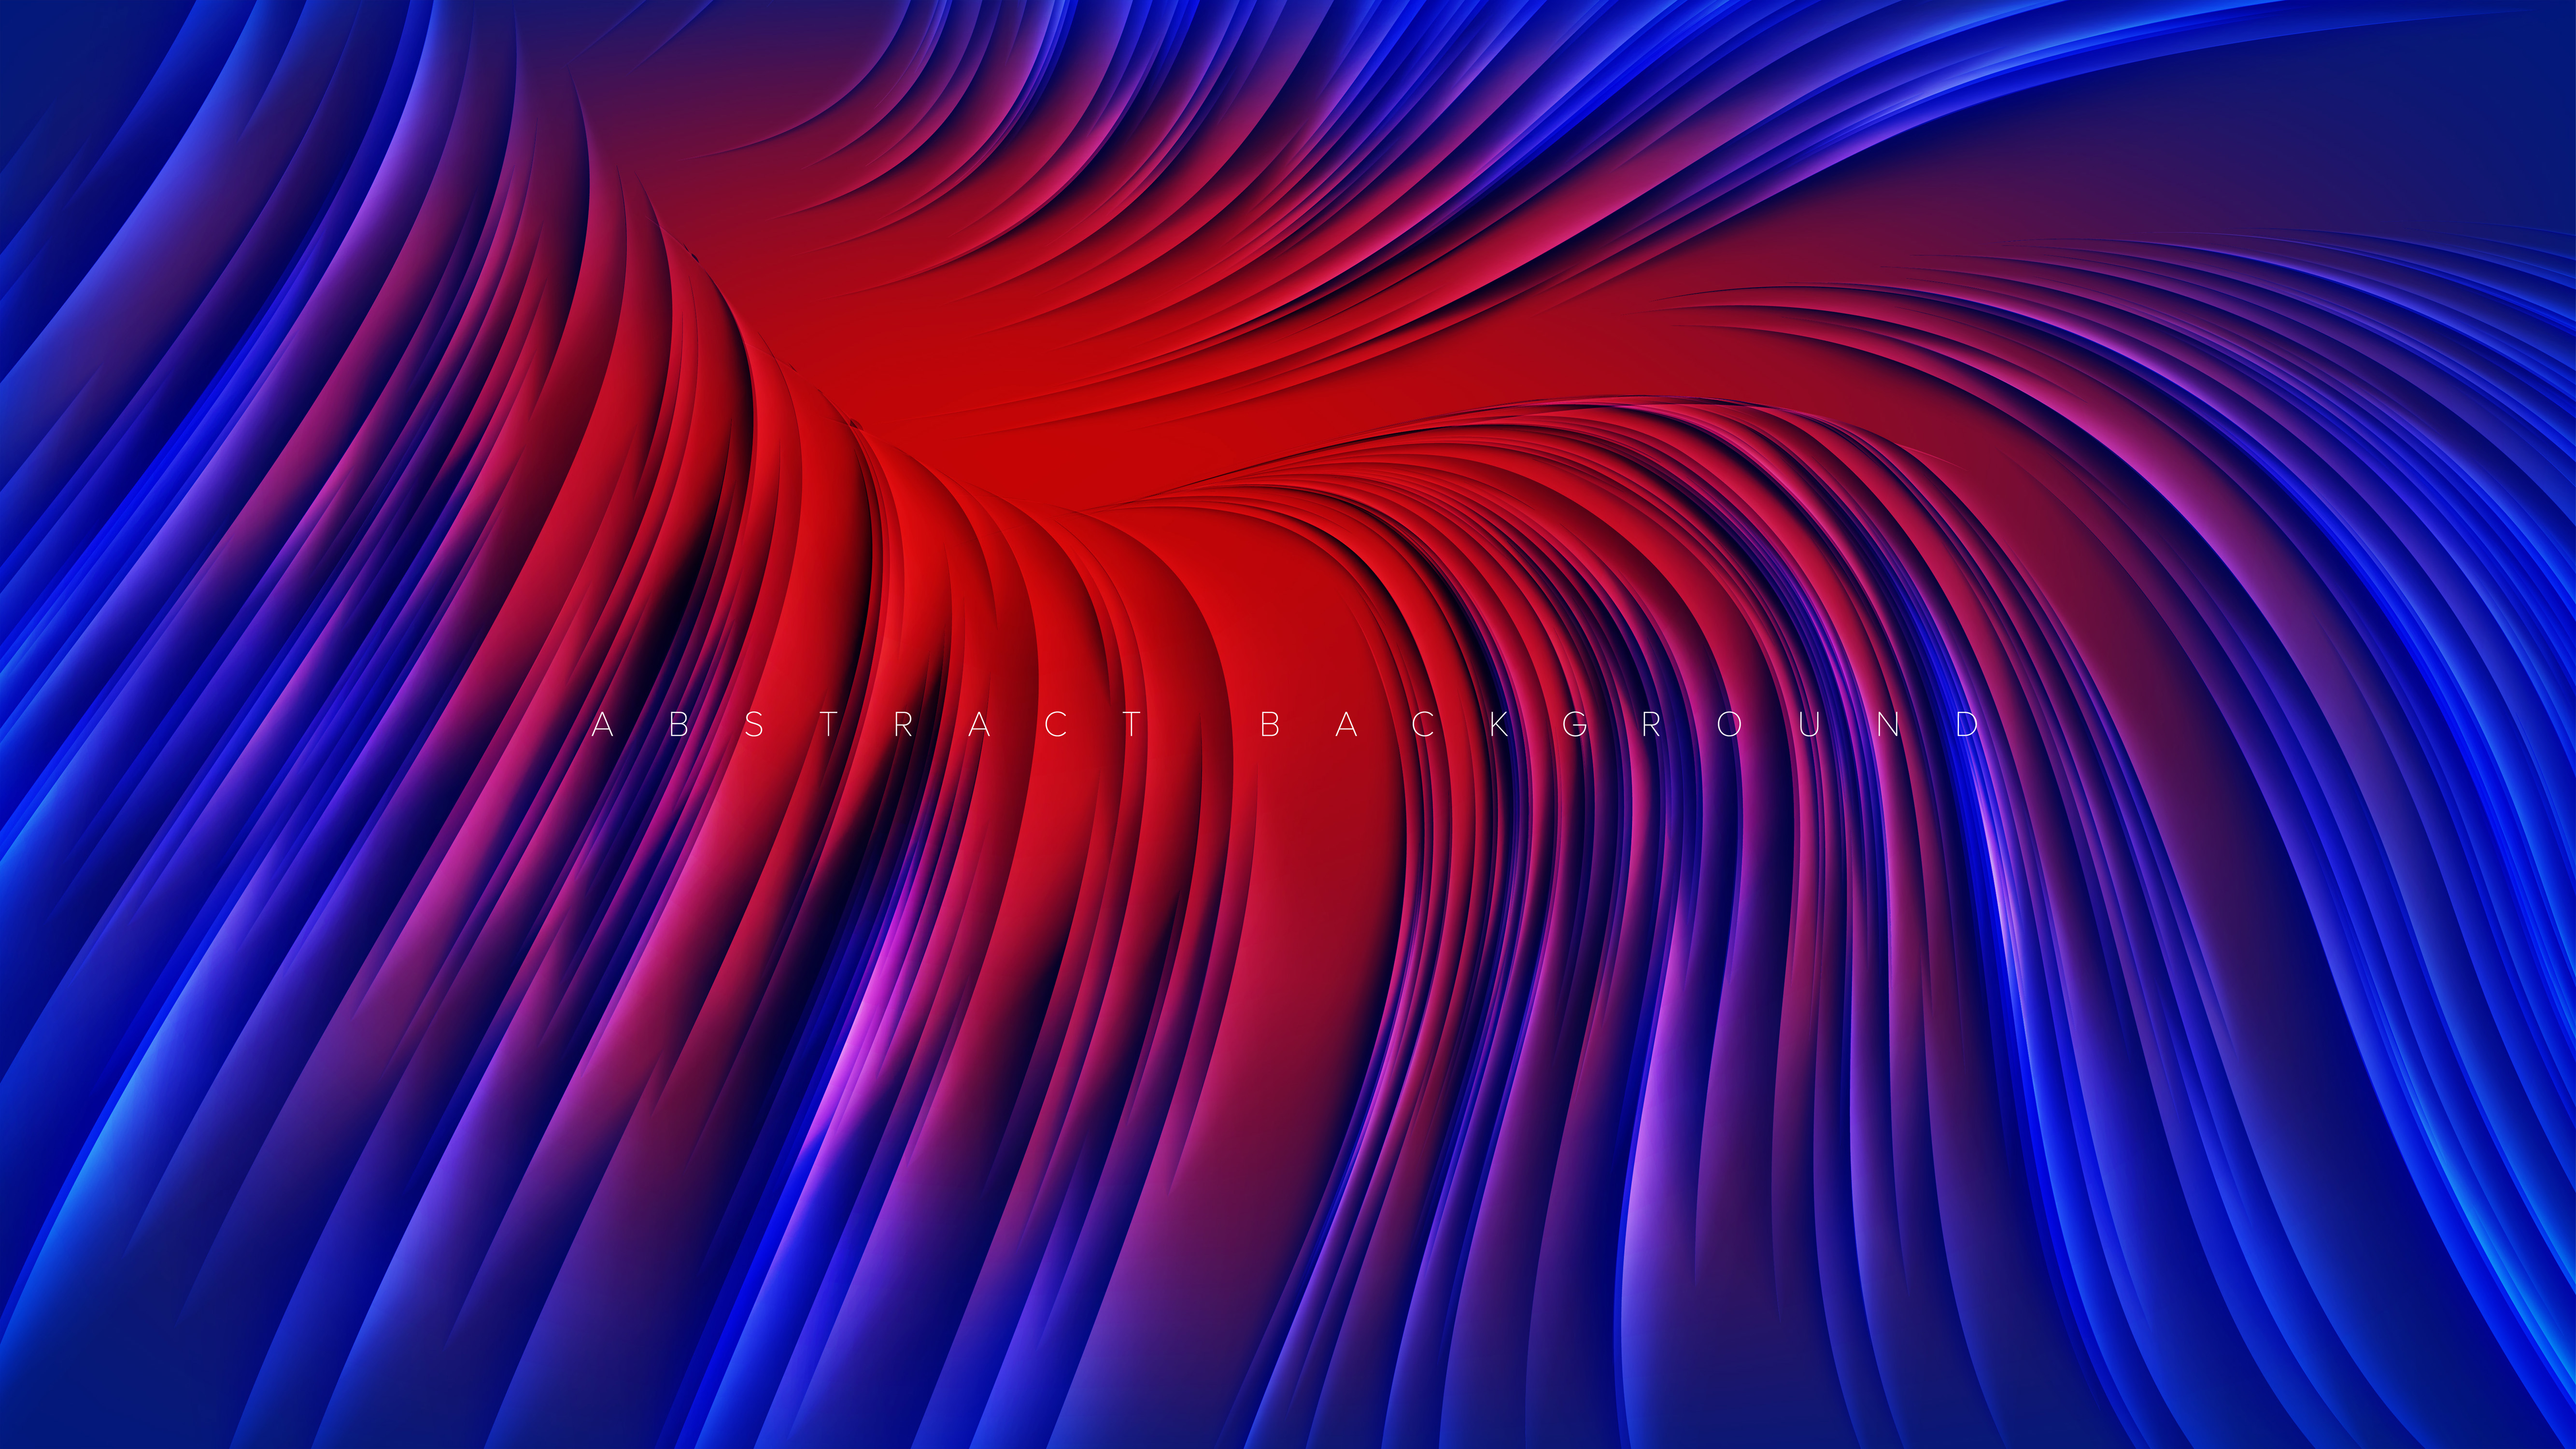 Abstract Red Blue Line Design Download Free Vectors Clipart Graphics Vector Art